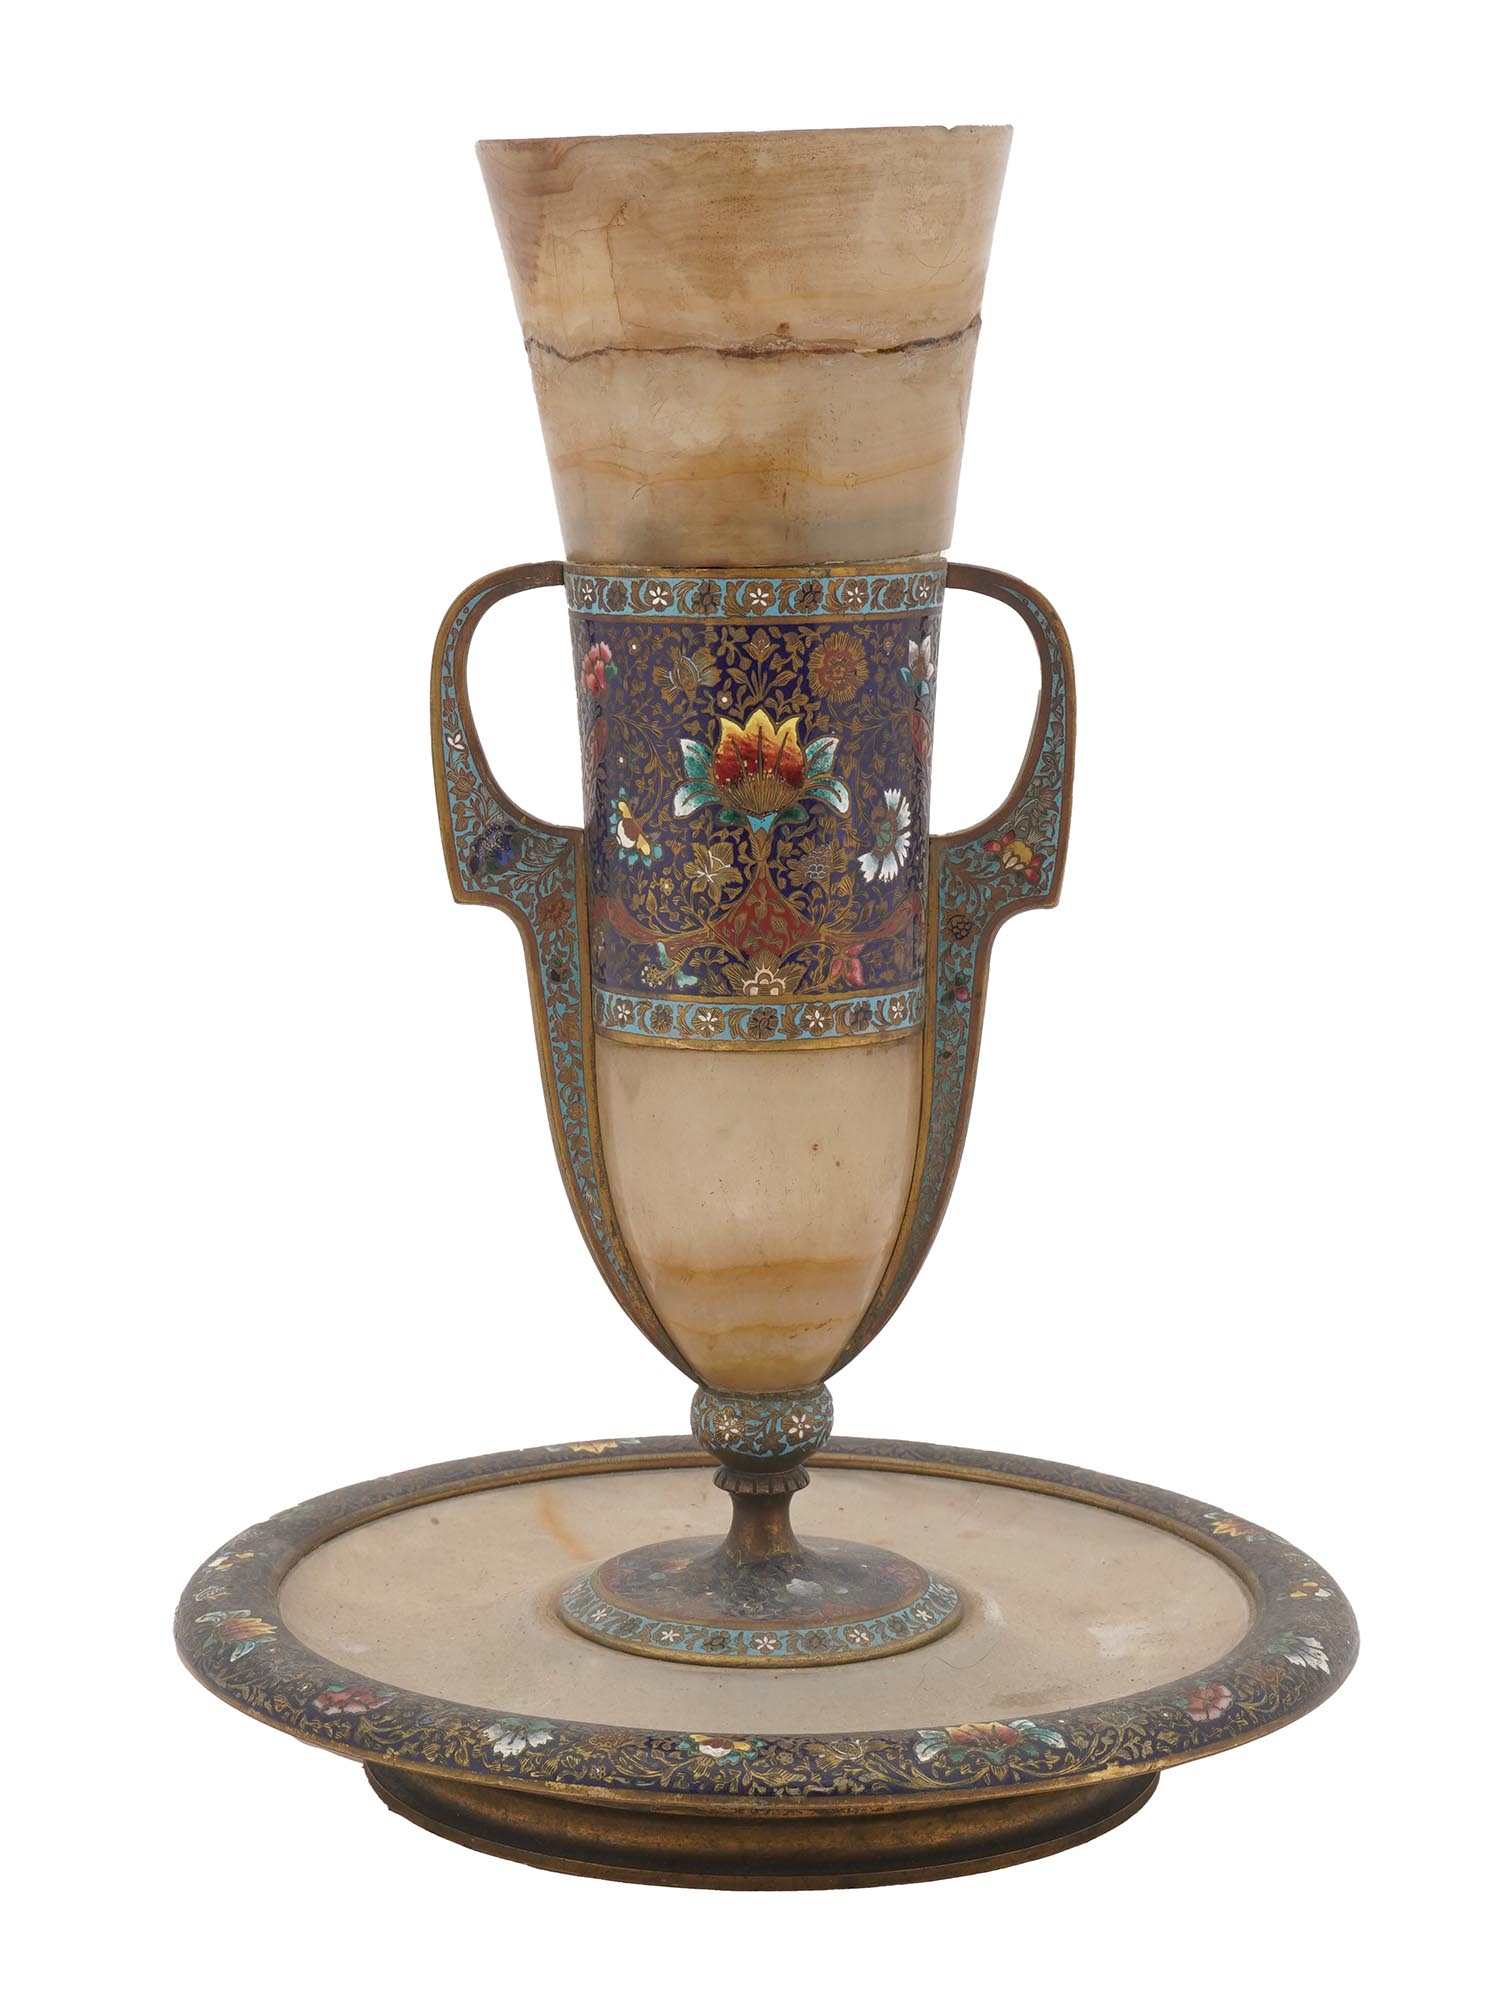 FRENCH CLOISONNE ENAMEL ONYX KIDDUSH CUP W STAND PIC-3